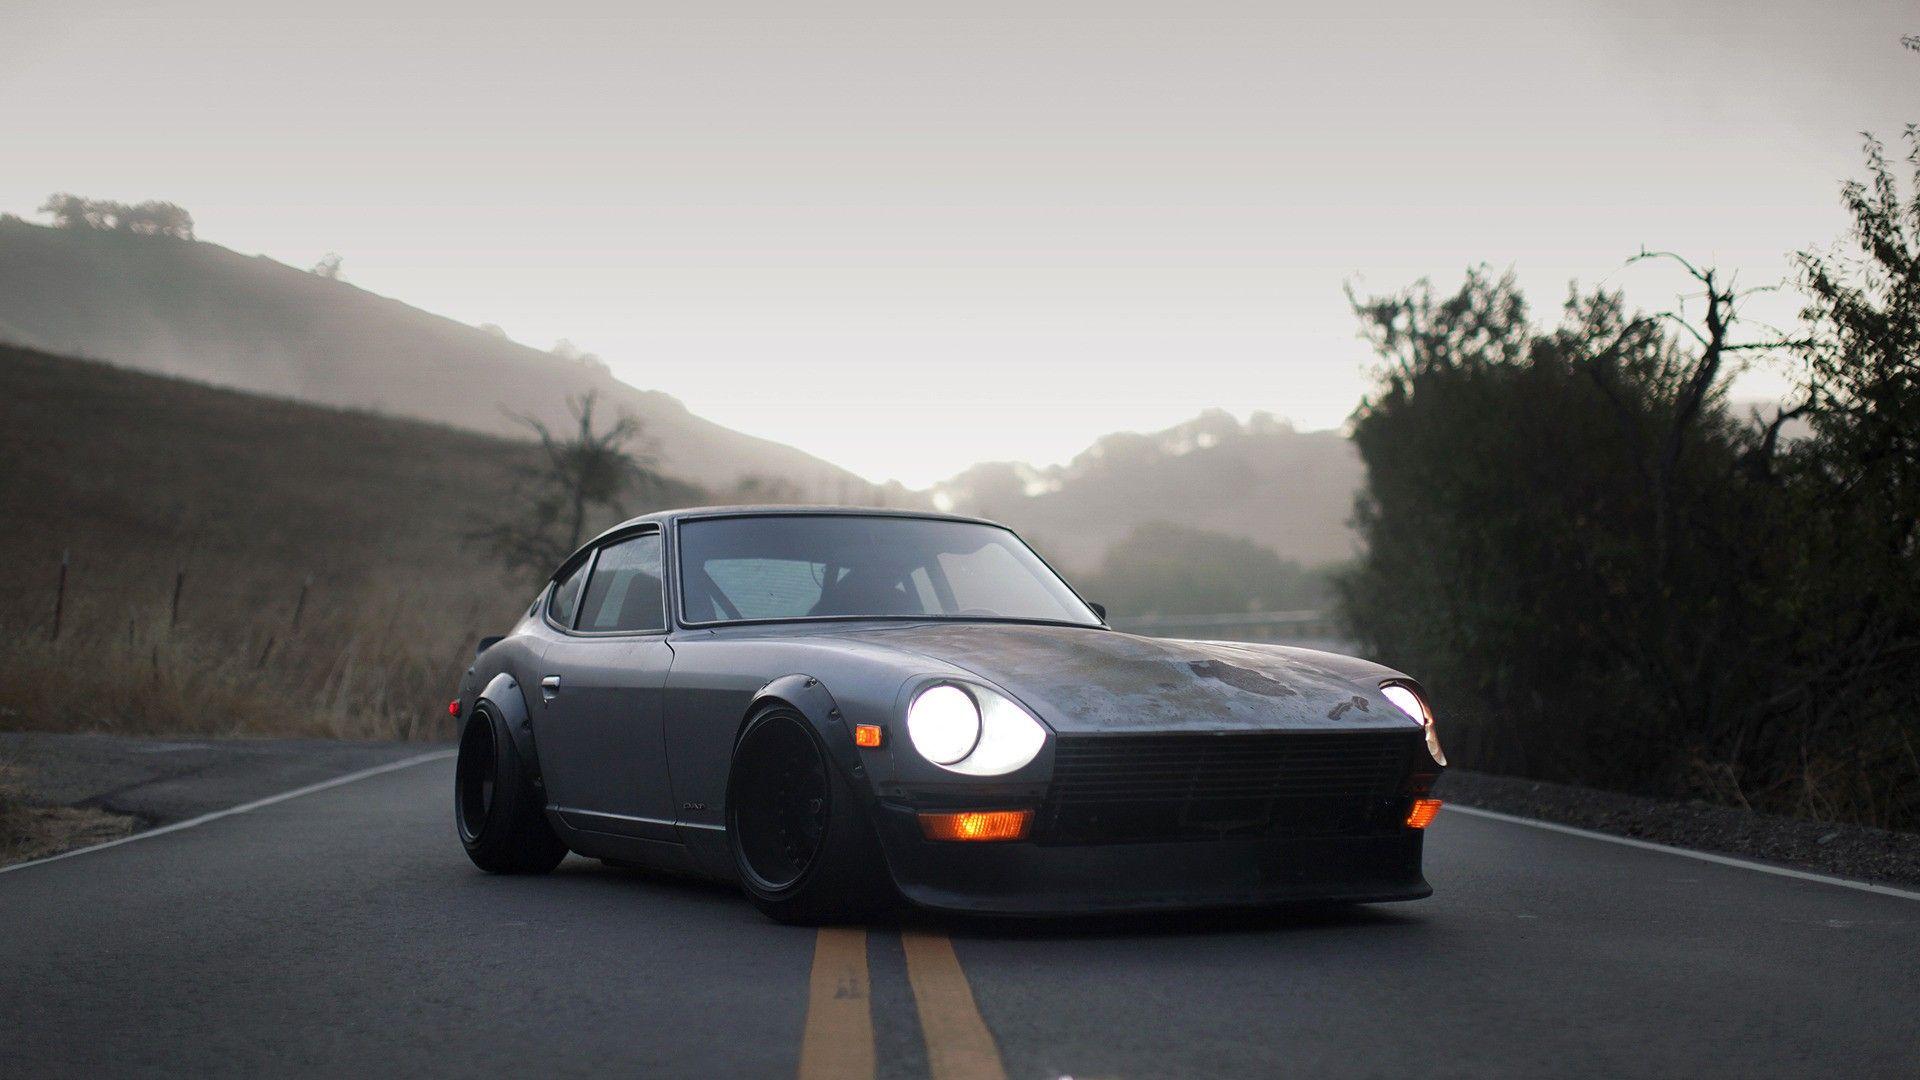 Fairlady Z Wallpapers Top Free Fairlady Z Backgrounds Wallpaperaccess